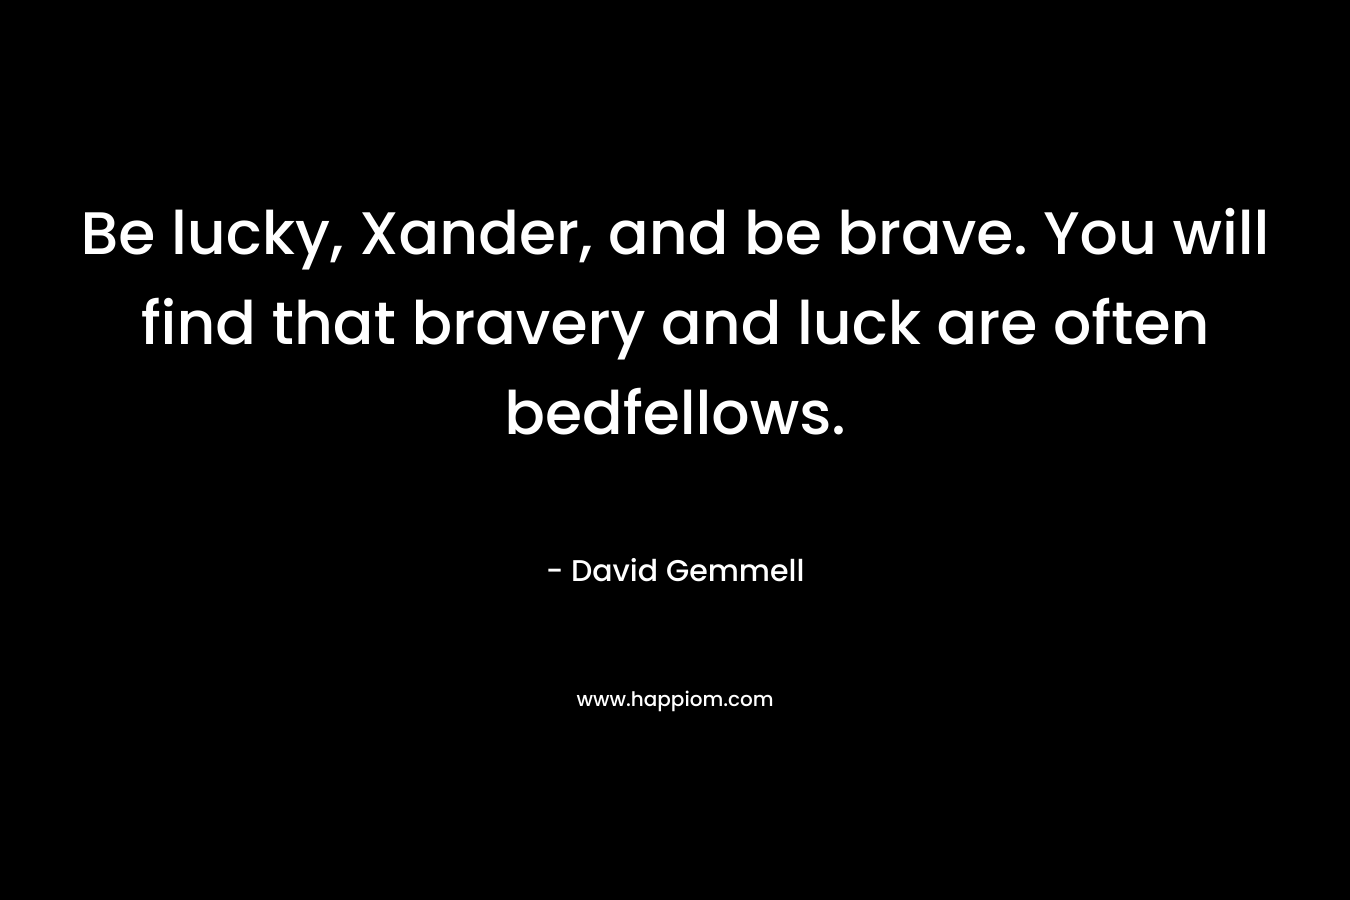 Be lucky, Xander, and be brave. You will find that bravery and luck are often bedfellows. – David Gemmell